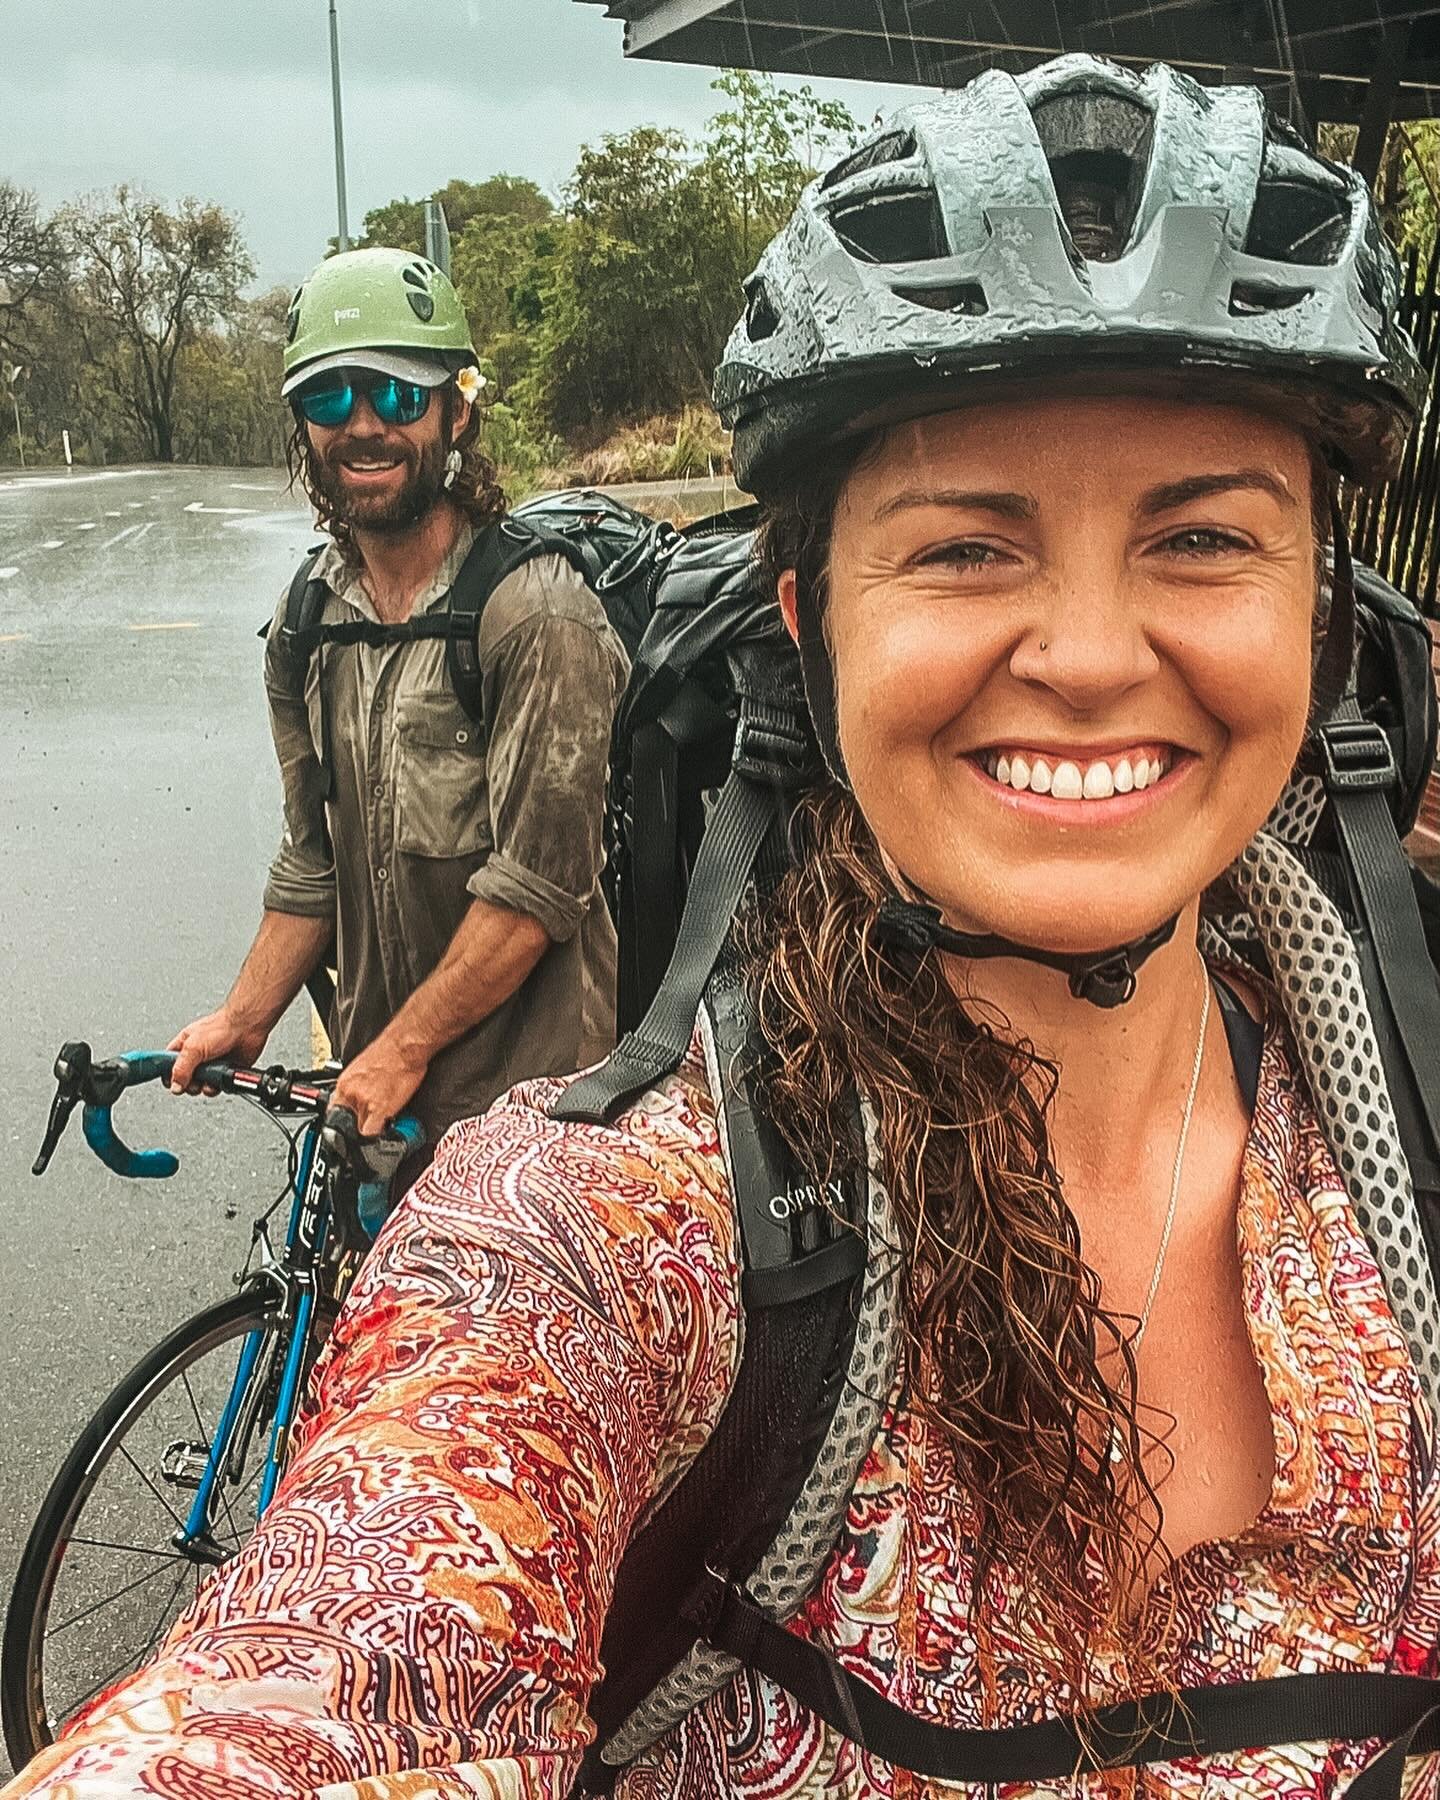 📣I&rsquo;ve got some wildly exciting news!📣

Bikes have always been a part of my life. I&rsquo;ve cycled around KI, driven across Aus with my steed on the roof, and I was the first female rider for EcoCaddy. I&rsquo;ve always owned one or two bikes